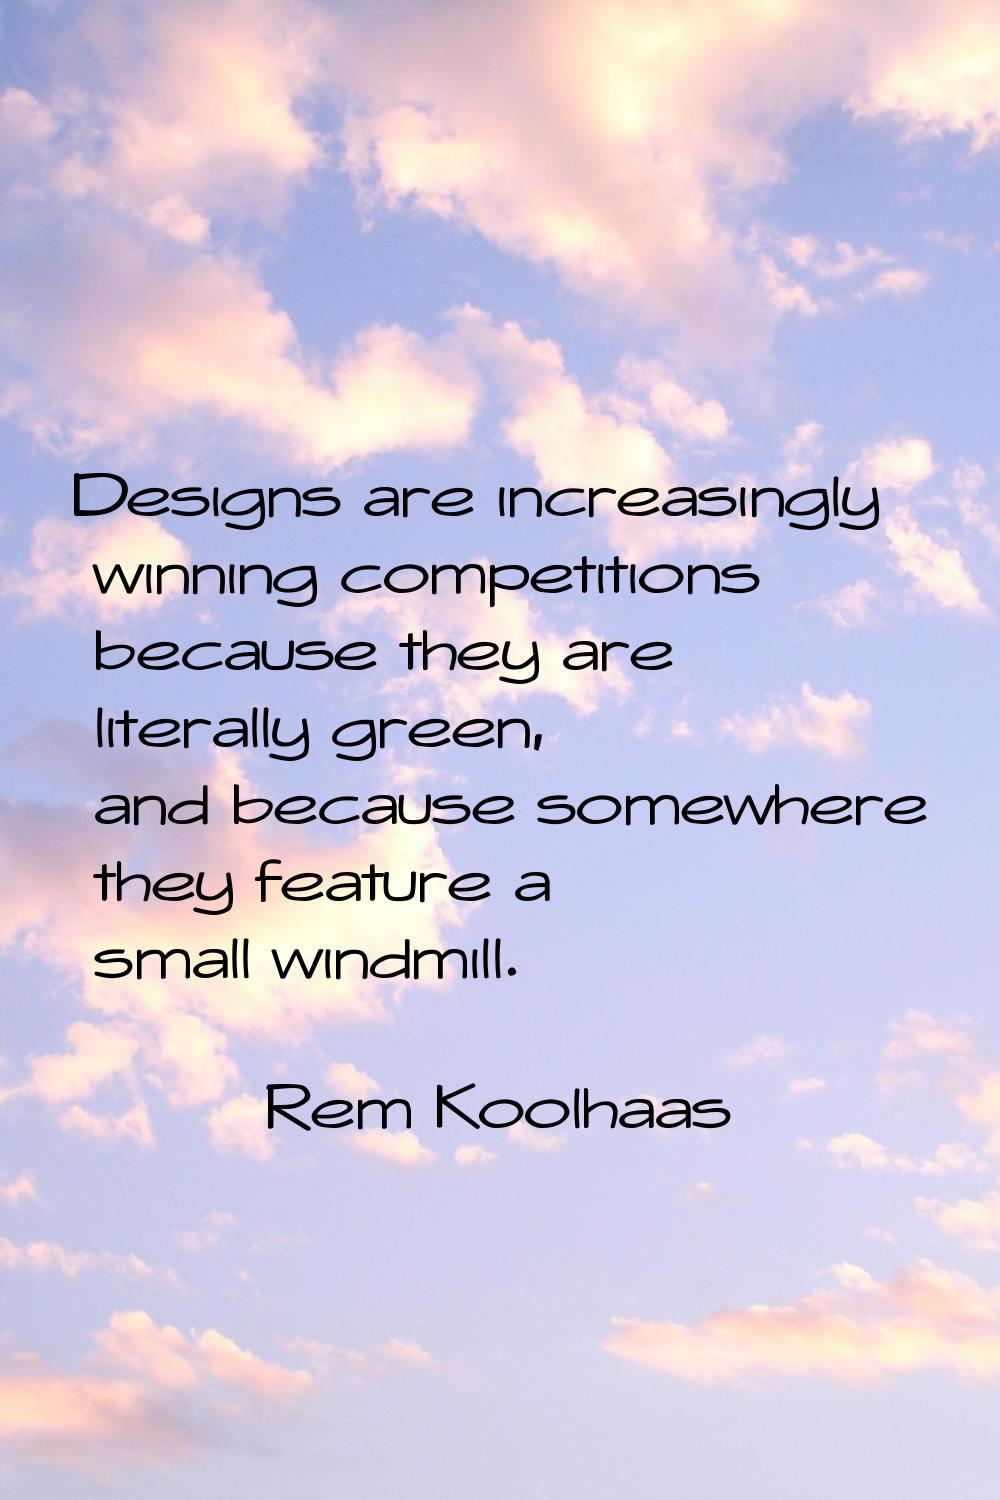 Designs are increasingly winning competitions because they are literally green, and because somewhe